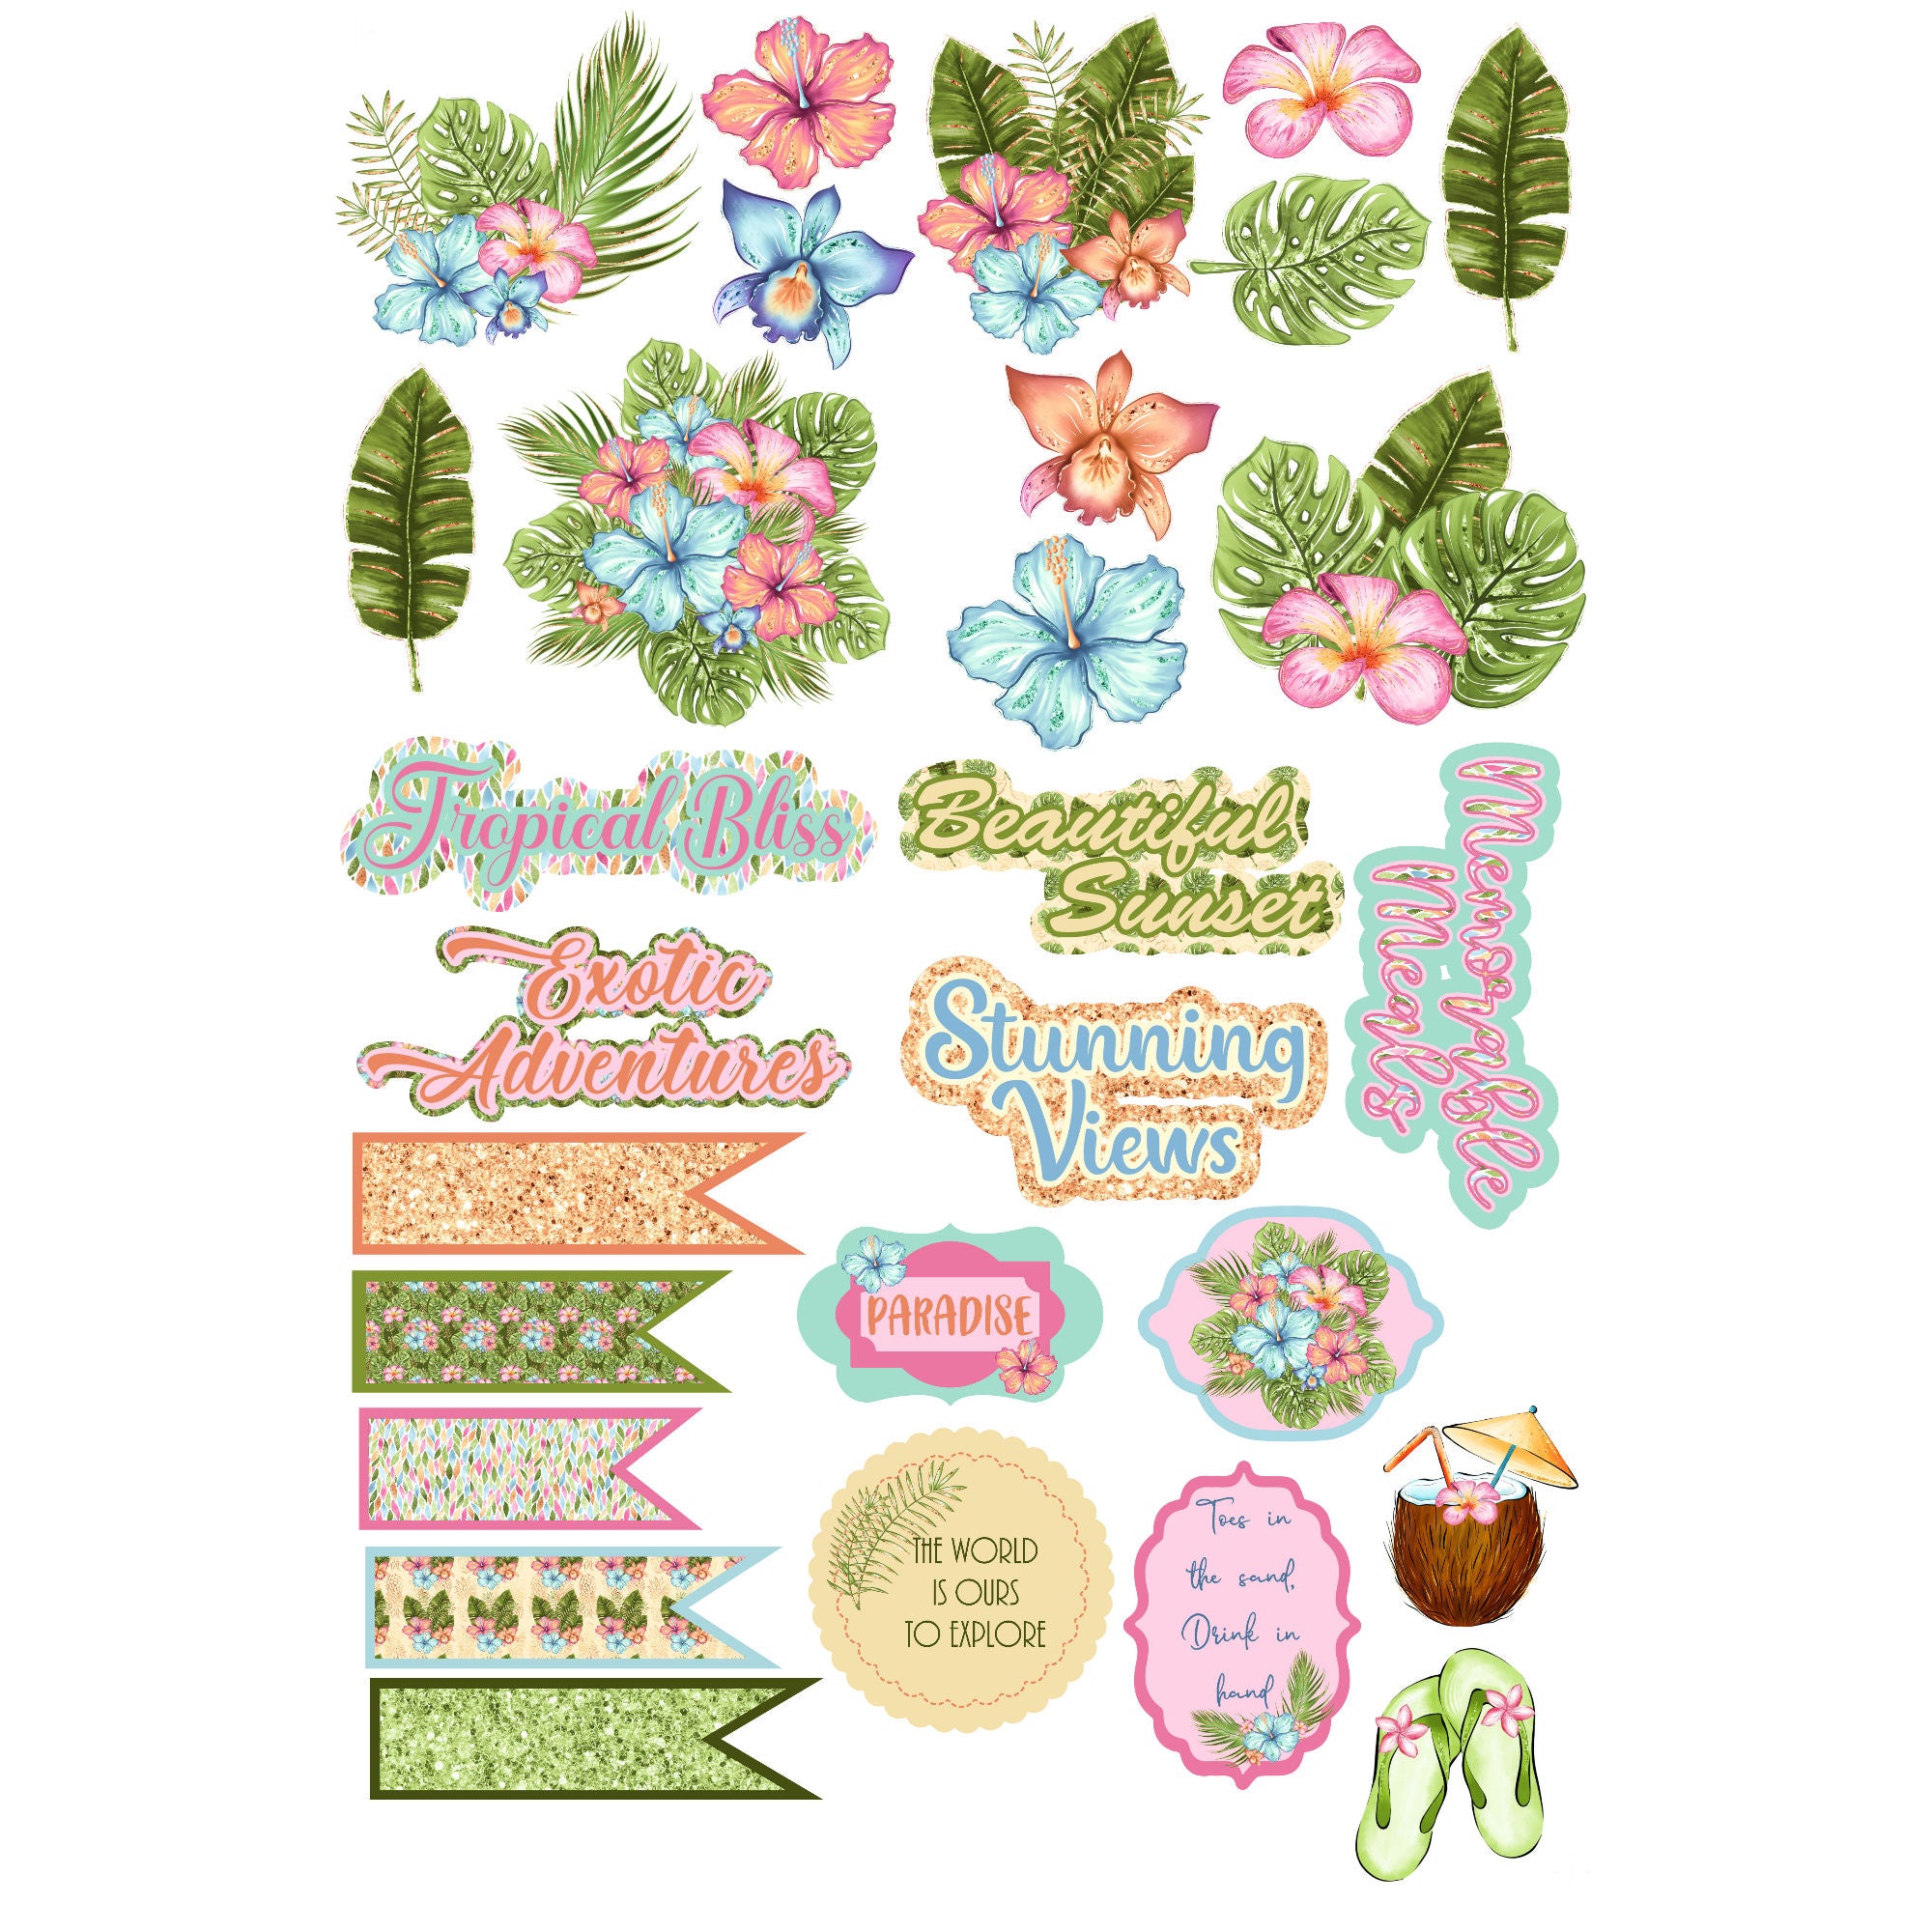 Tropical Bliss 12 x 12 Scrapbook Collection Kit by SSC Designs